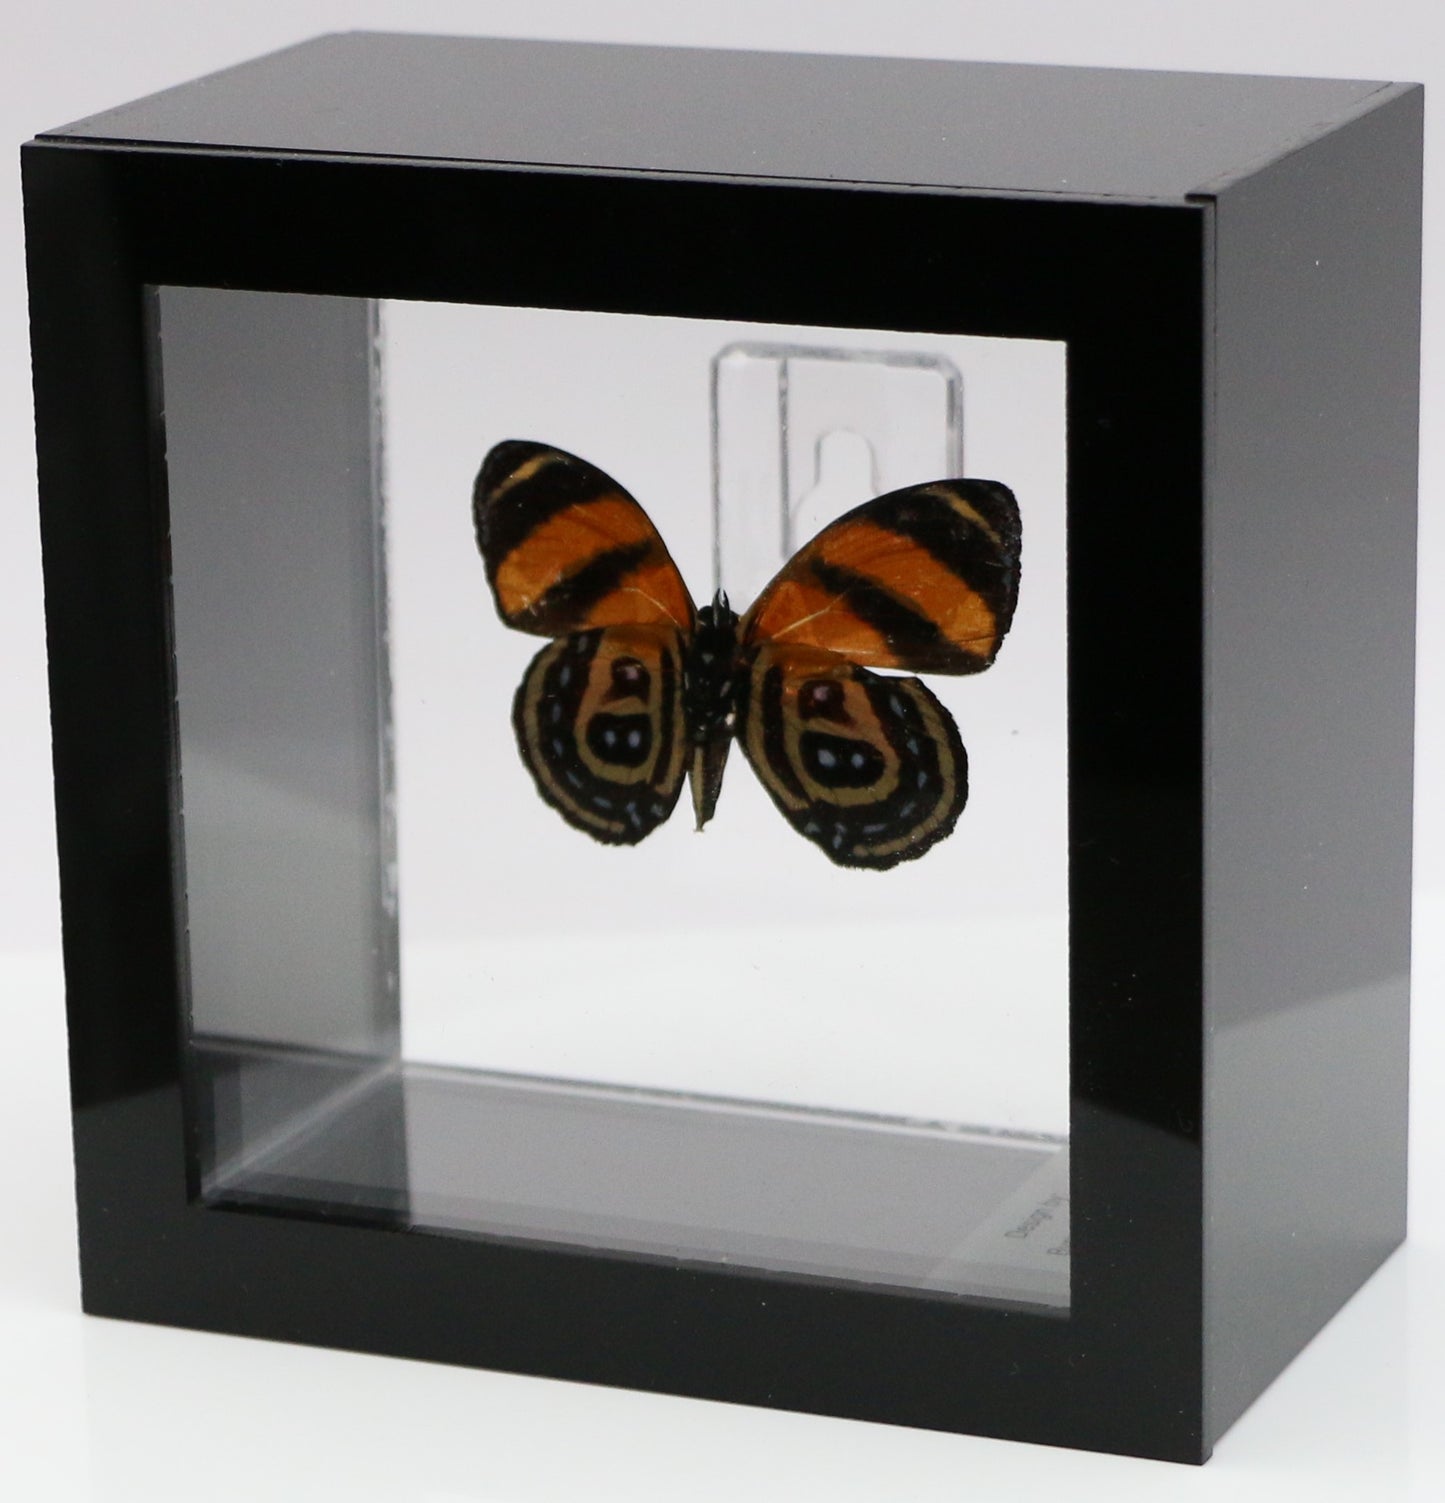 9040406 - Real Butterfly Acrylic Display Box - 4"X4" - BD Butterfly (Callicore cynosura )  - Ventral